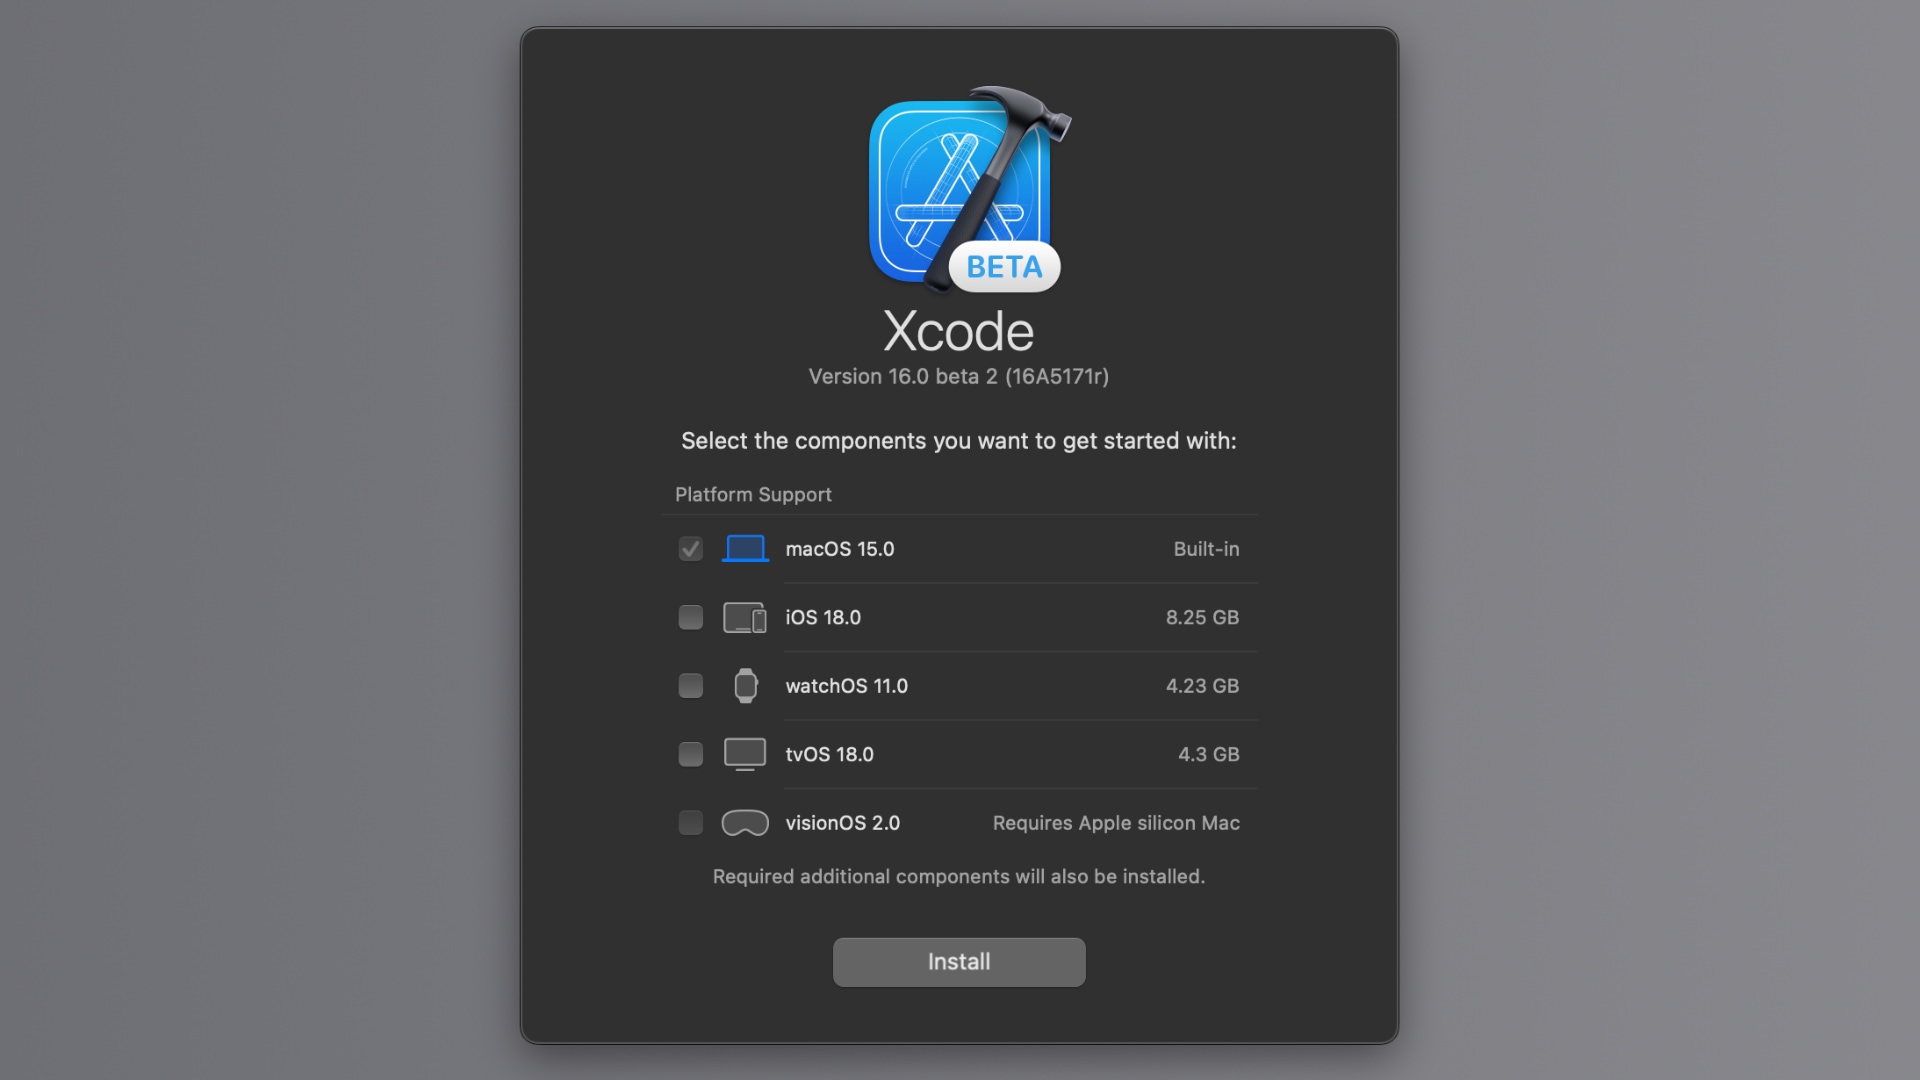 Xcode for Mac prompting the user to choose additional components to install